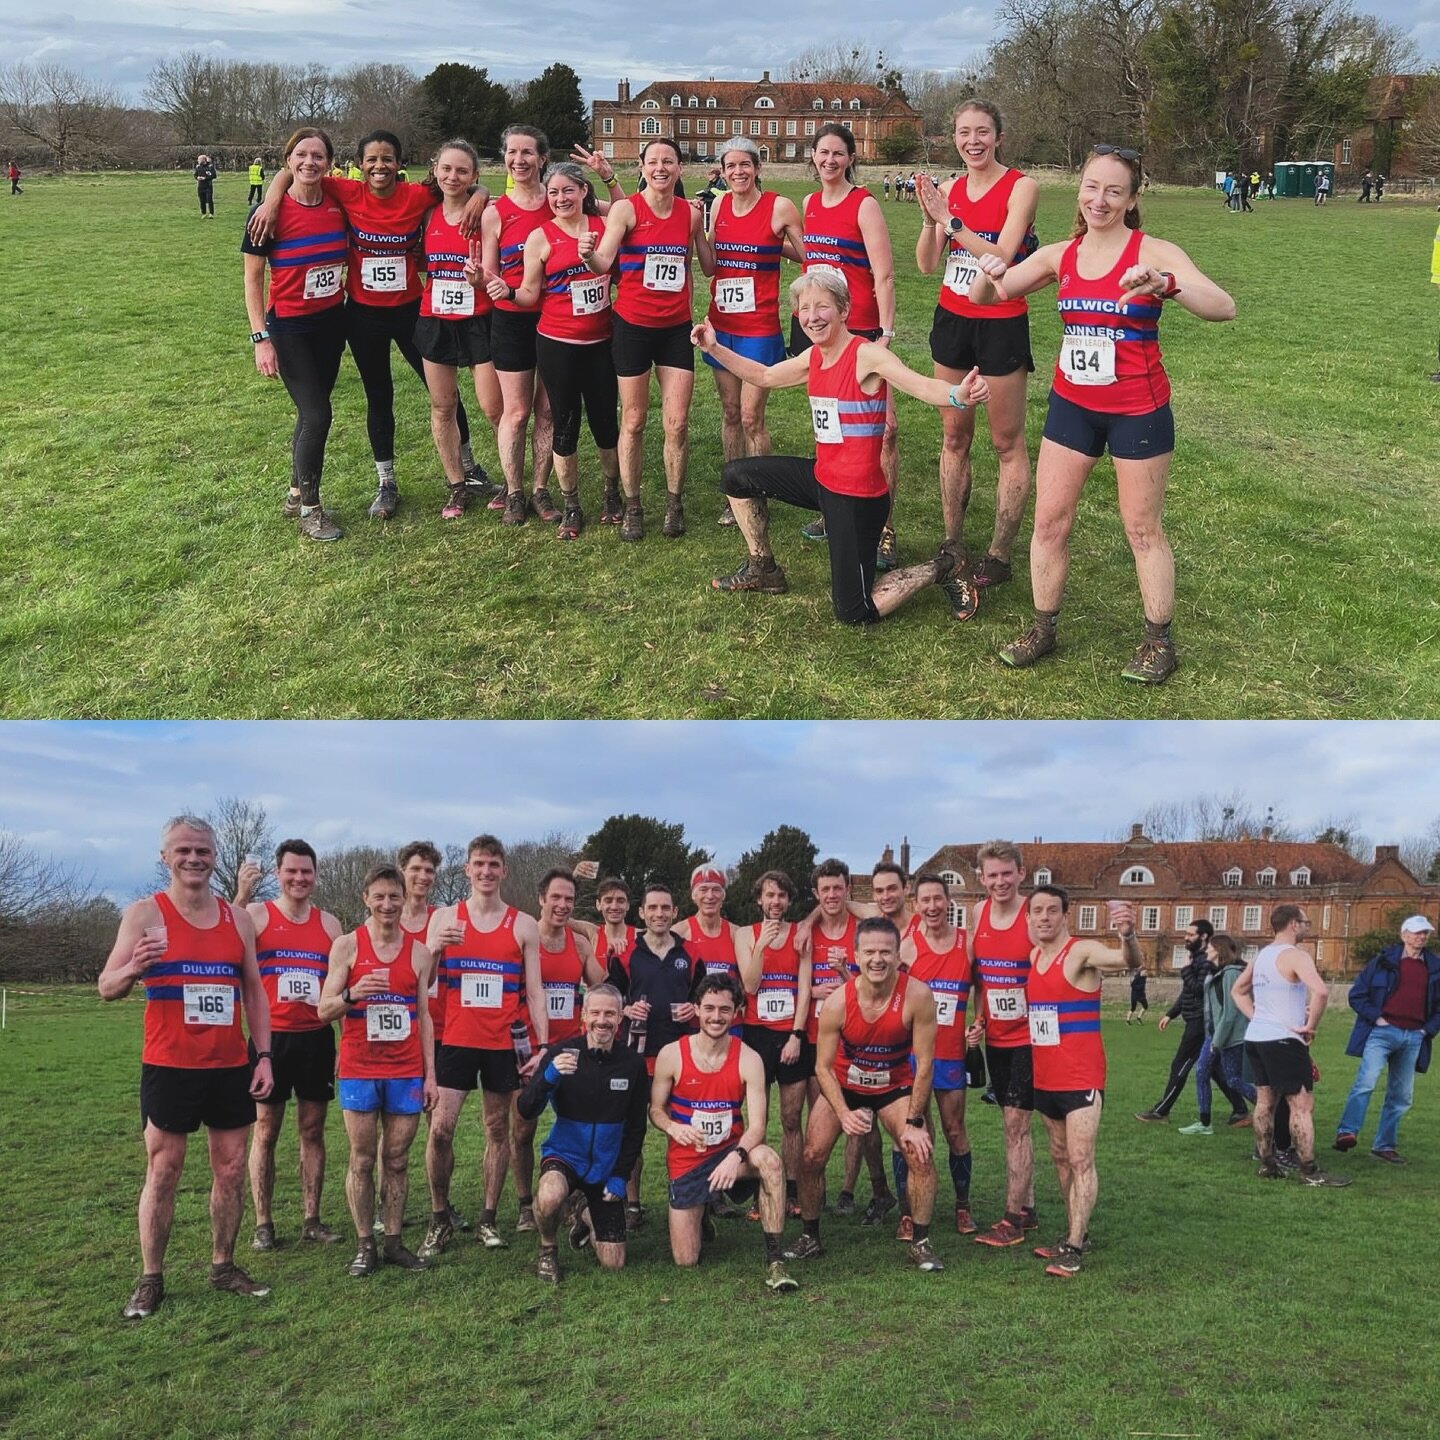 The end of another Surrey League XC campaign and a new stately home to grace the league (👏 @ggacathletics for organising) - Men&rsquo;s team achieve possibly best ever 4th league finish position behind Hercules, Belgrave and Kent. The ladies best pe